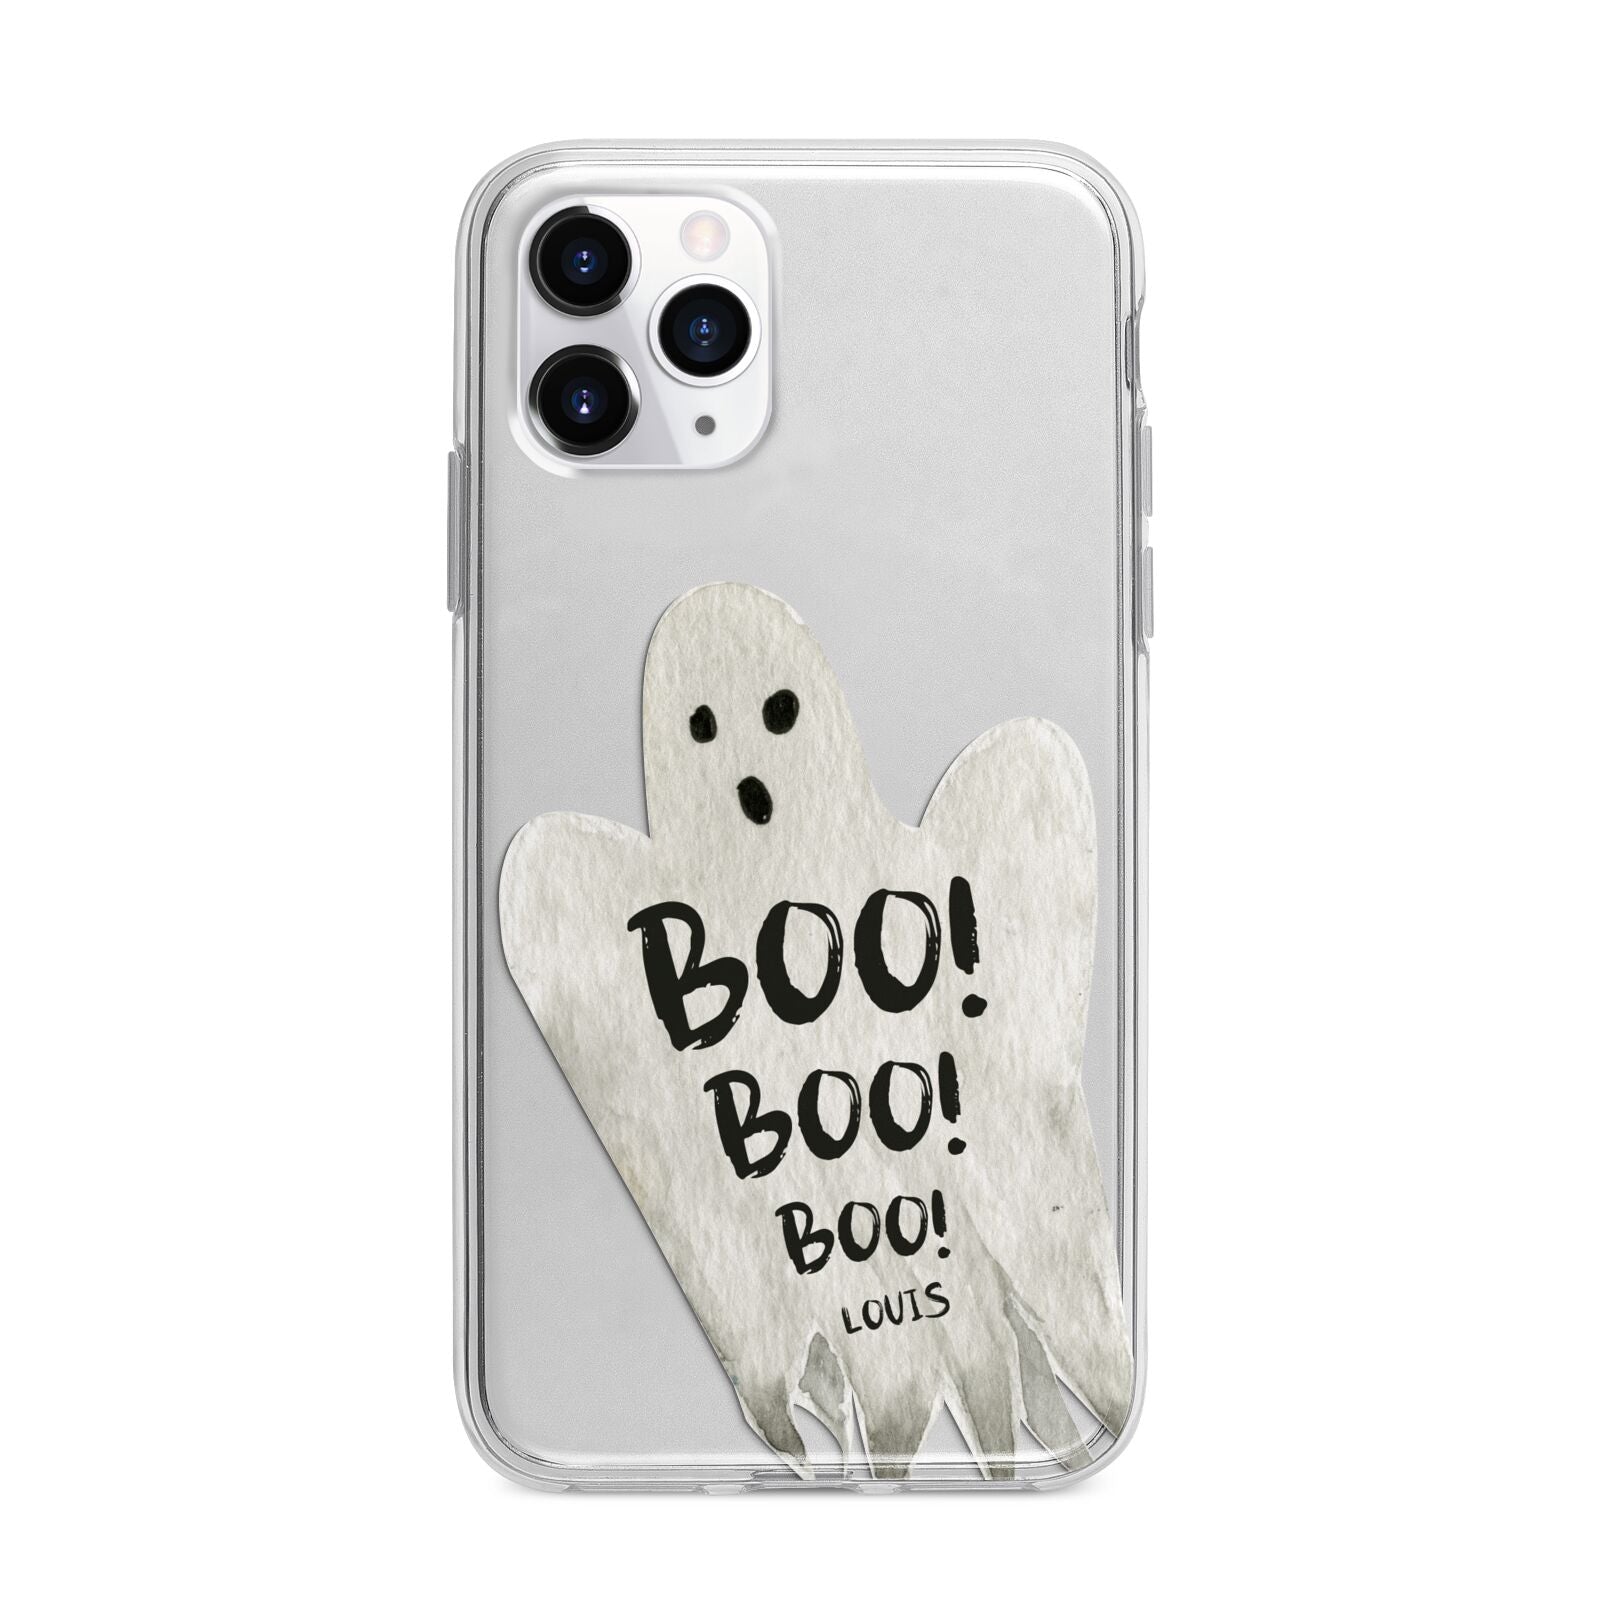 Boo Ghost Custom Apple iPhone 11 Pro Max in Silver with Bumper Case